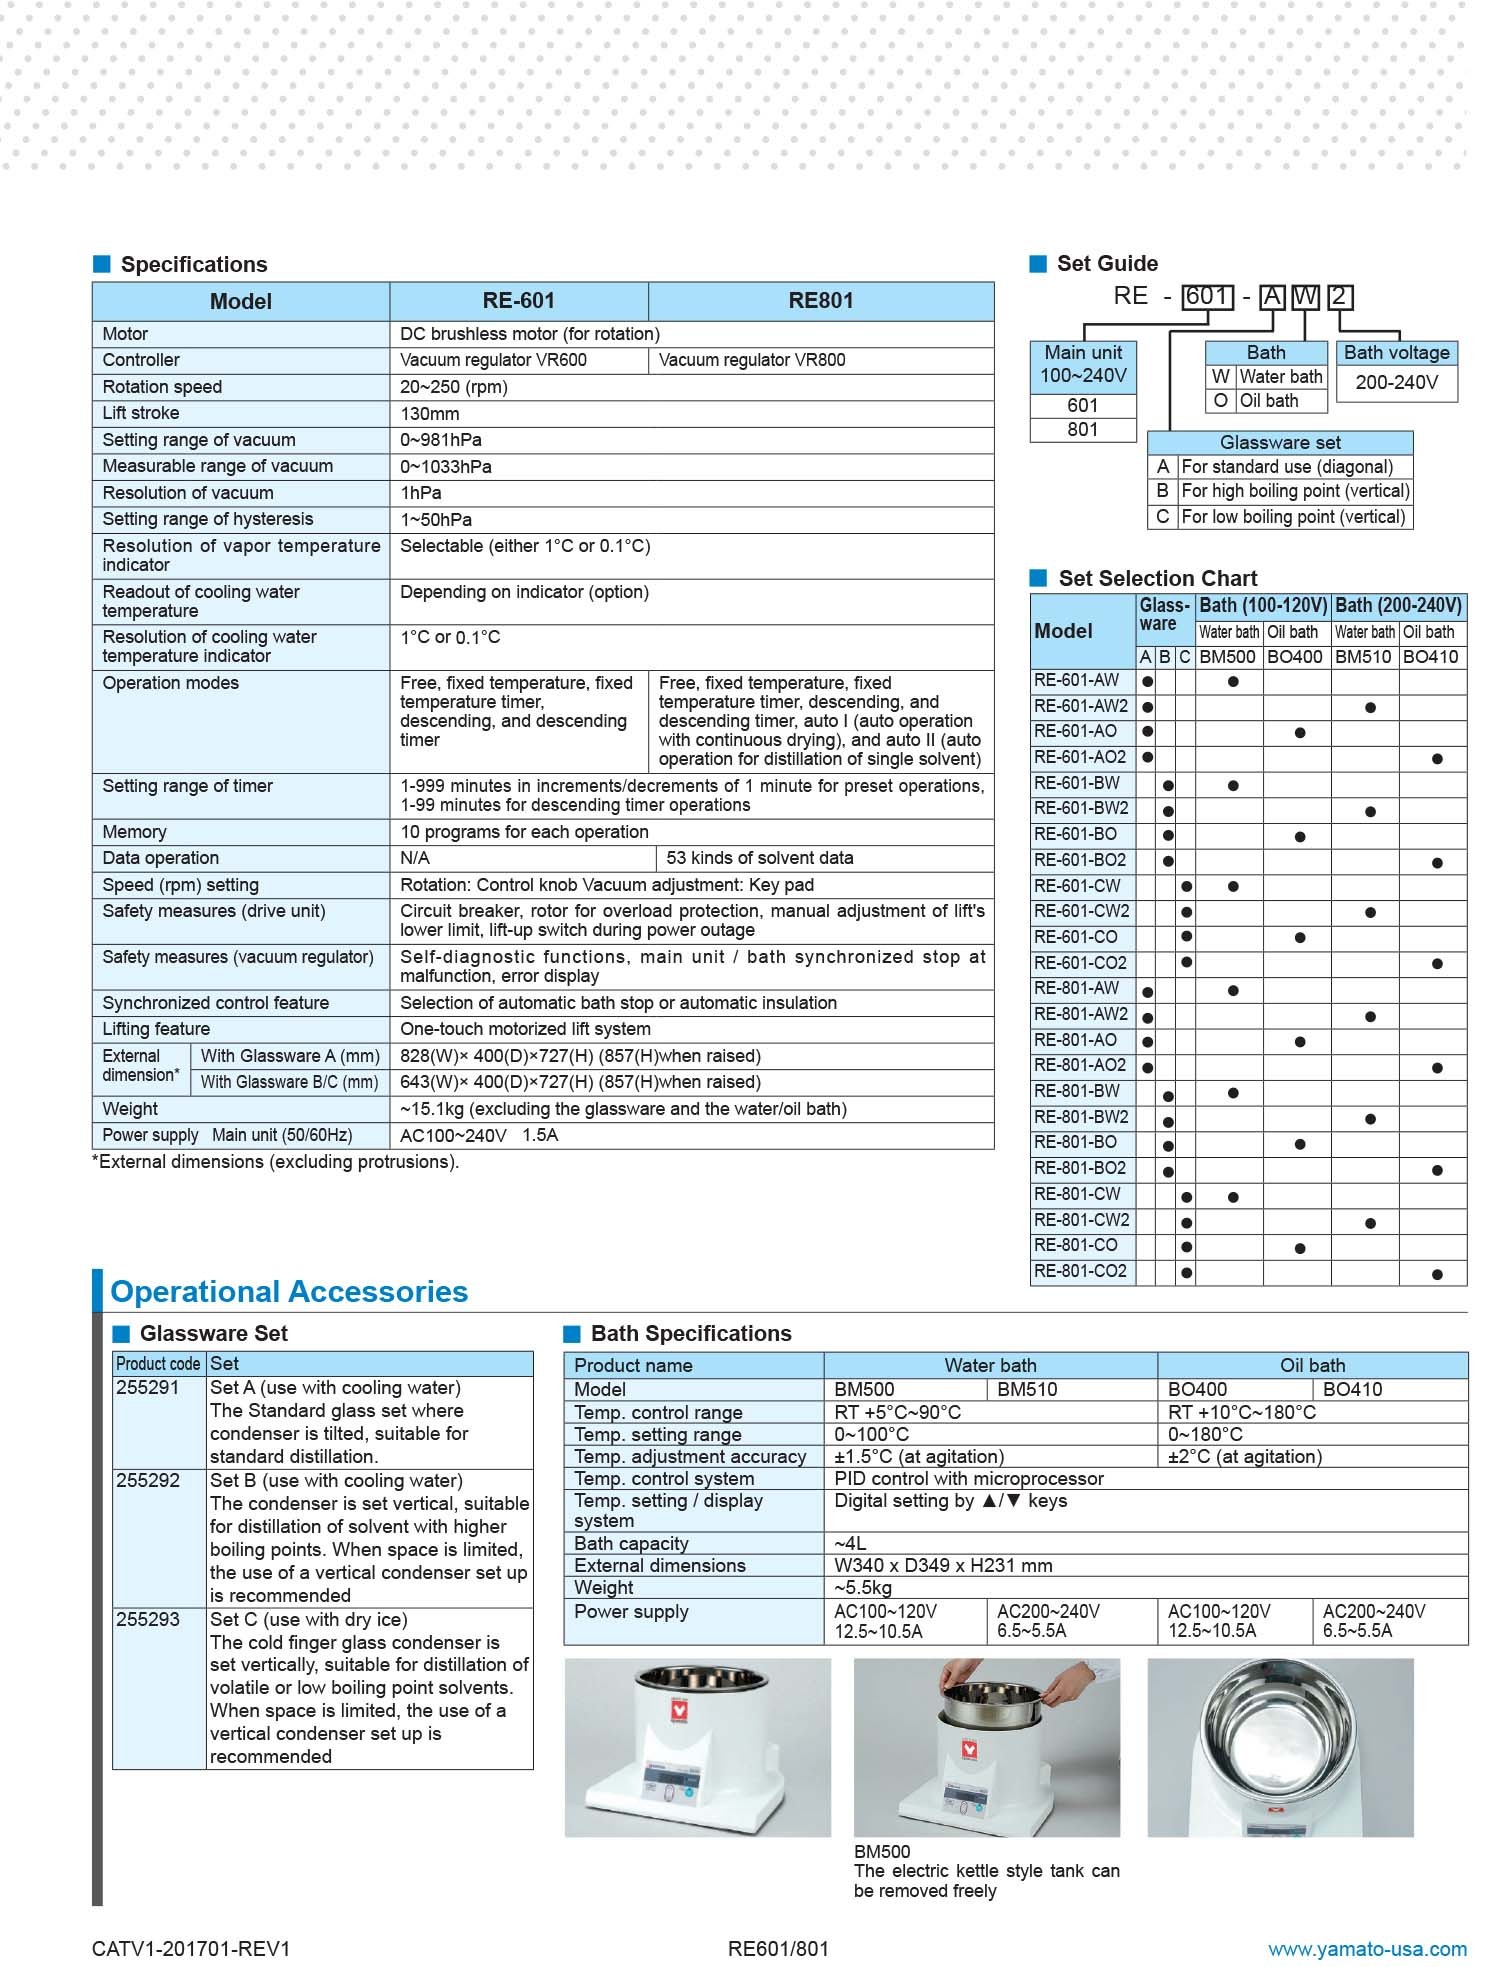 Yamato_RE601-801_DETAILS_Specifications_2019